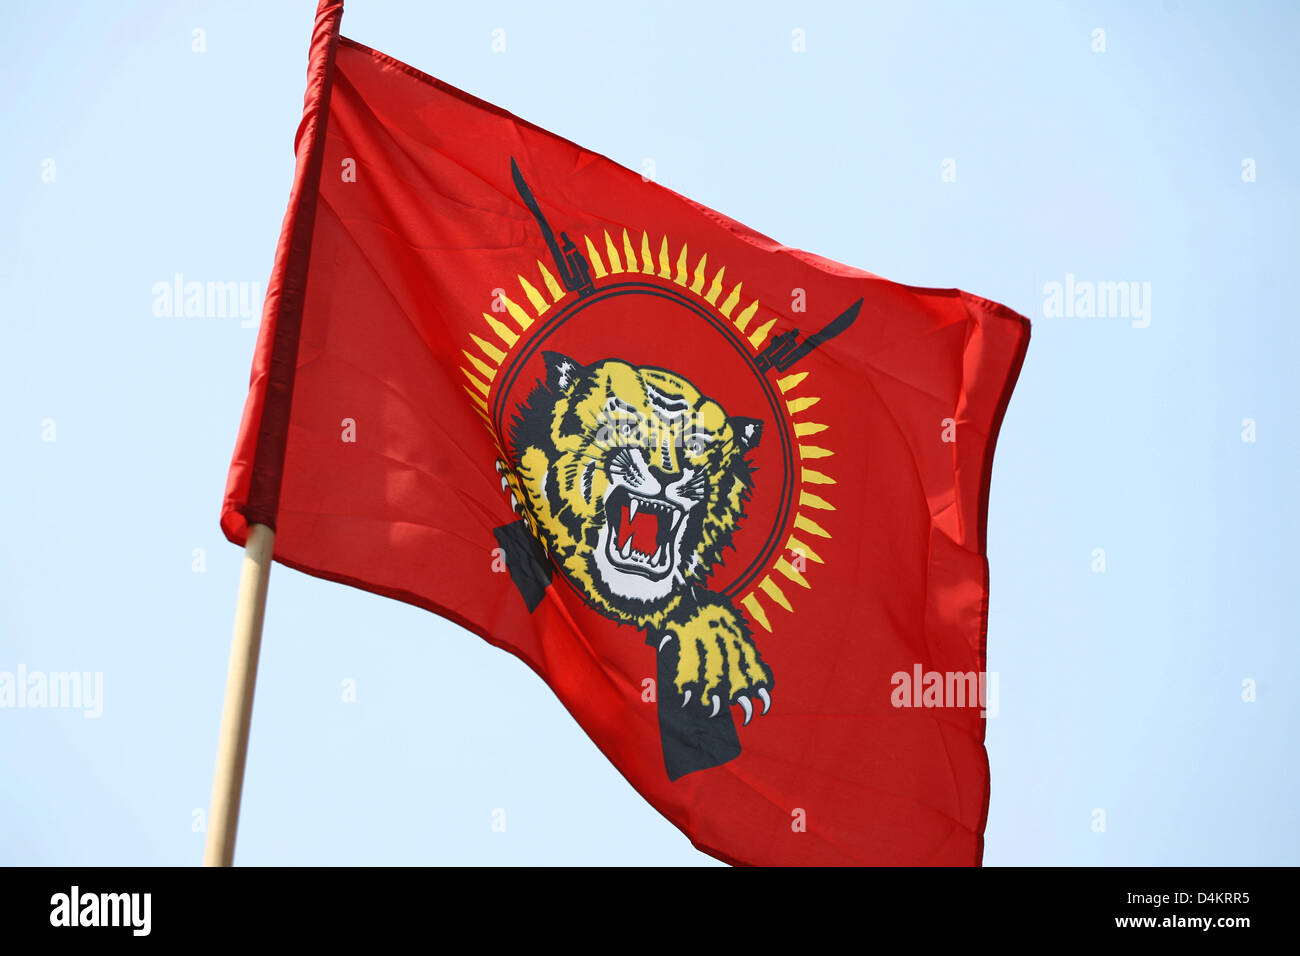 A flag of the Liberation Tigers of Tamil Eelam (LTTE) are waved at a protest of the Tamil Tigers in Frankfurt Main, Germany, 01 May 2009. The Tamils demonstrate for an own state and independence from Sri Lanka. However, the LTTE is a militant organisation and is alo proscribed as a terrorist organisations due to suicide bombings. Photo: Wolfram Steinberg Stock Photo